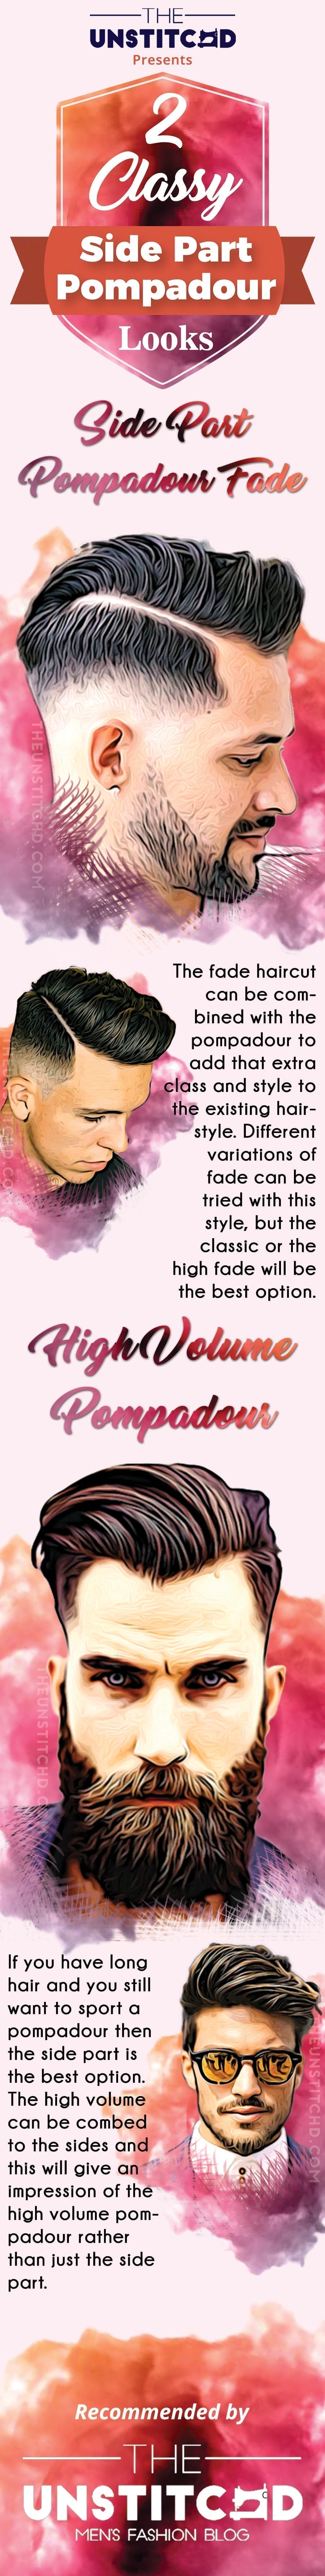 pompadour-side-part-hairstyle-info